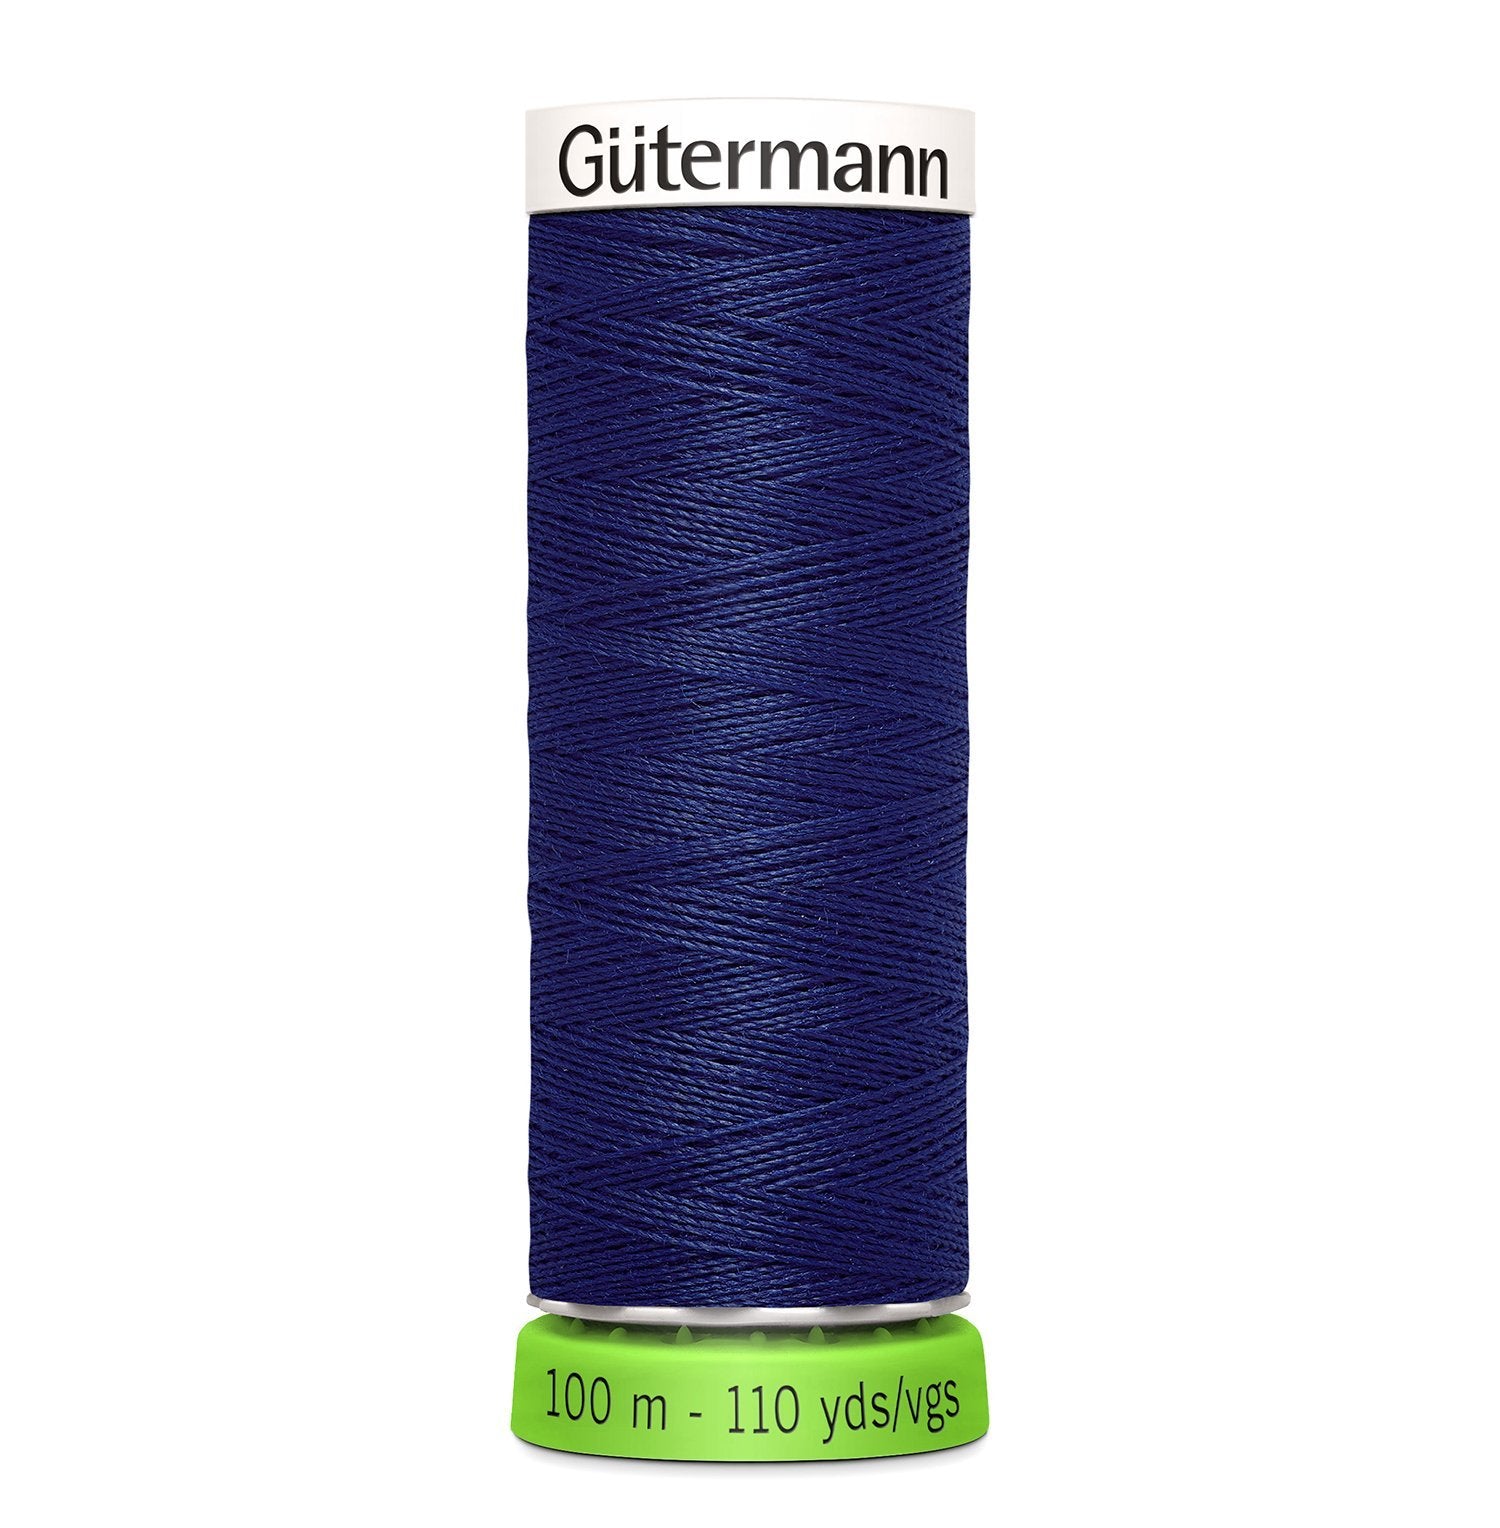 Gutermann Recycled Thread 100m, Colour 309 from Jaycotts Sewing Supplies